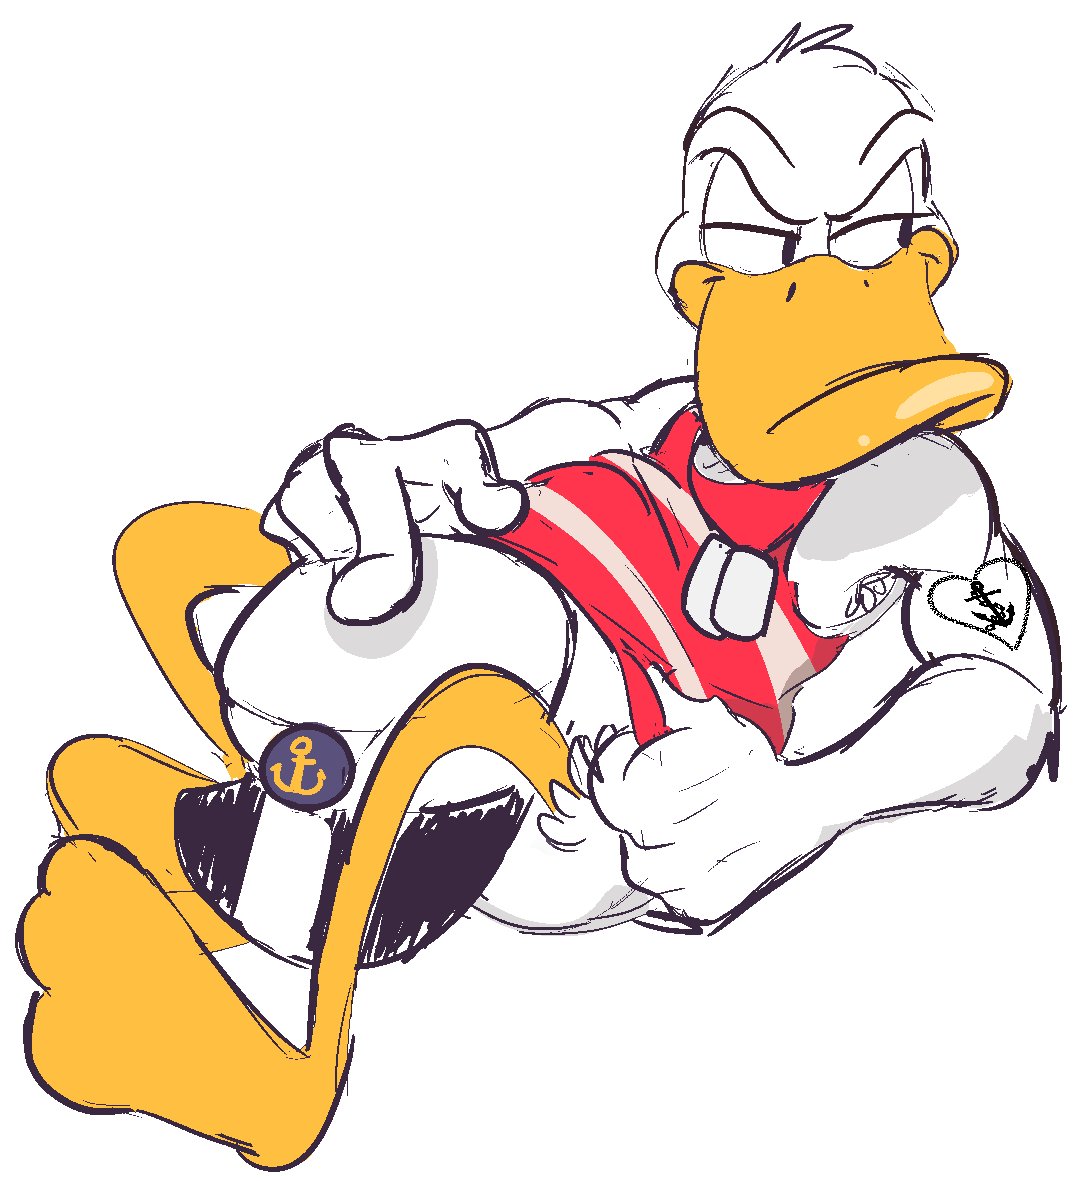 Hey so uh What if Donald but more uhh Scruffy and stuff.